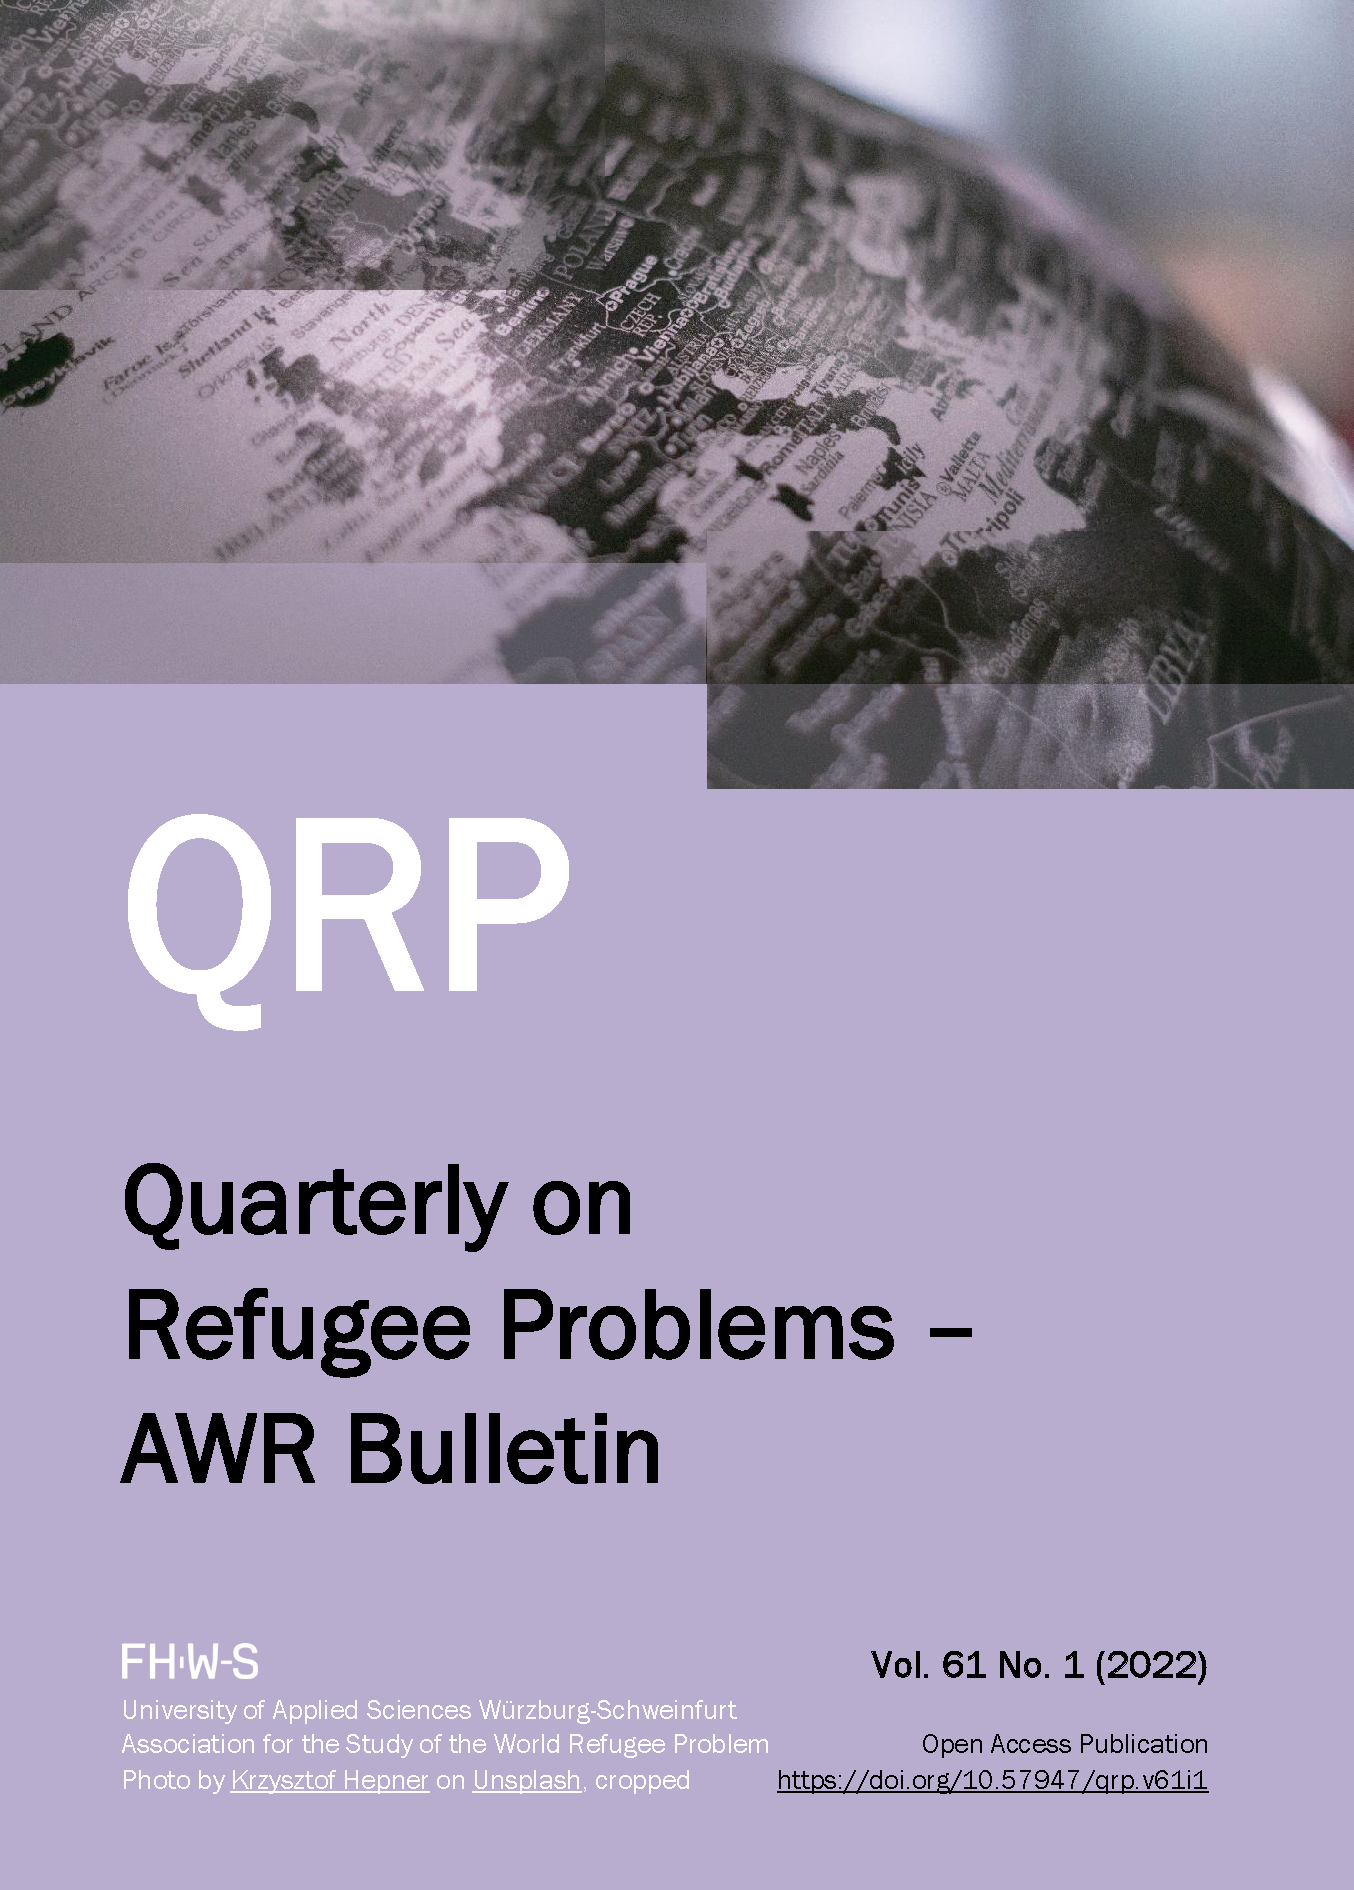 The cover of the 2022, volume 61, first issue of the Quarterly on Refugee Problems - AWR Bulletin